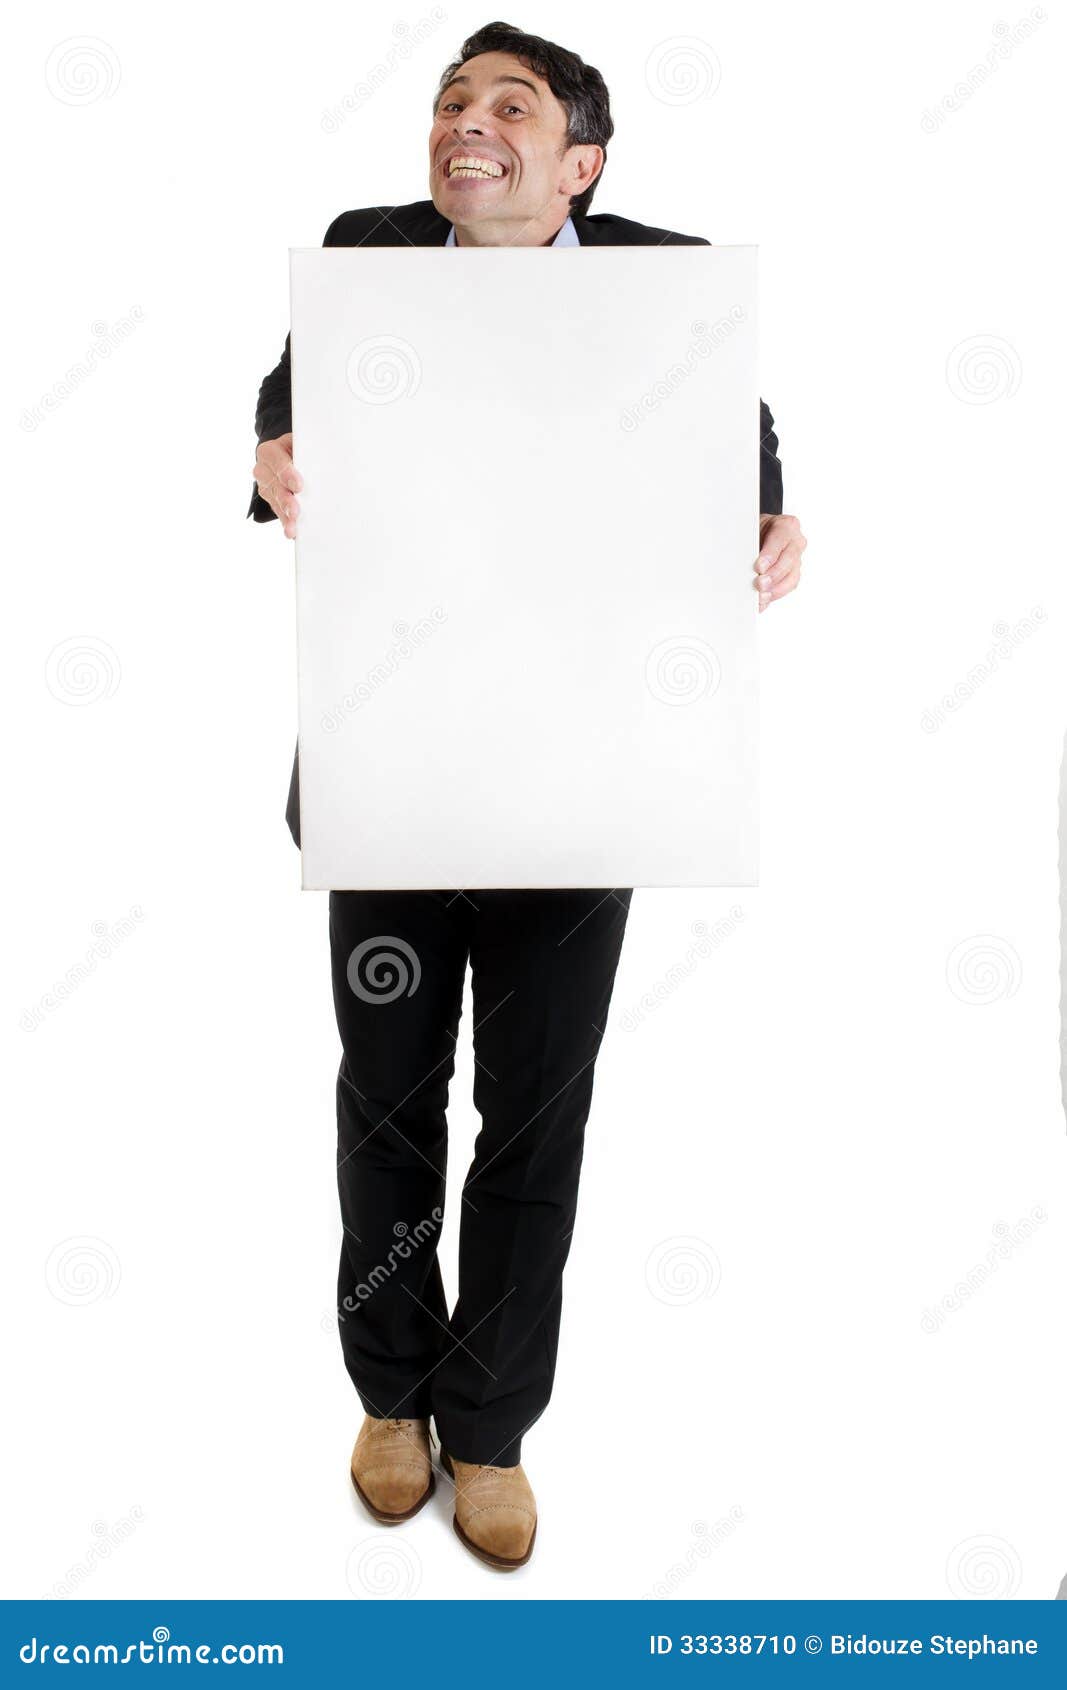 Man with a Cheesy Grin Holding Stock Photo - Image of cheesy, attention ...